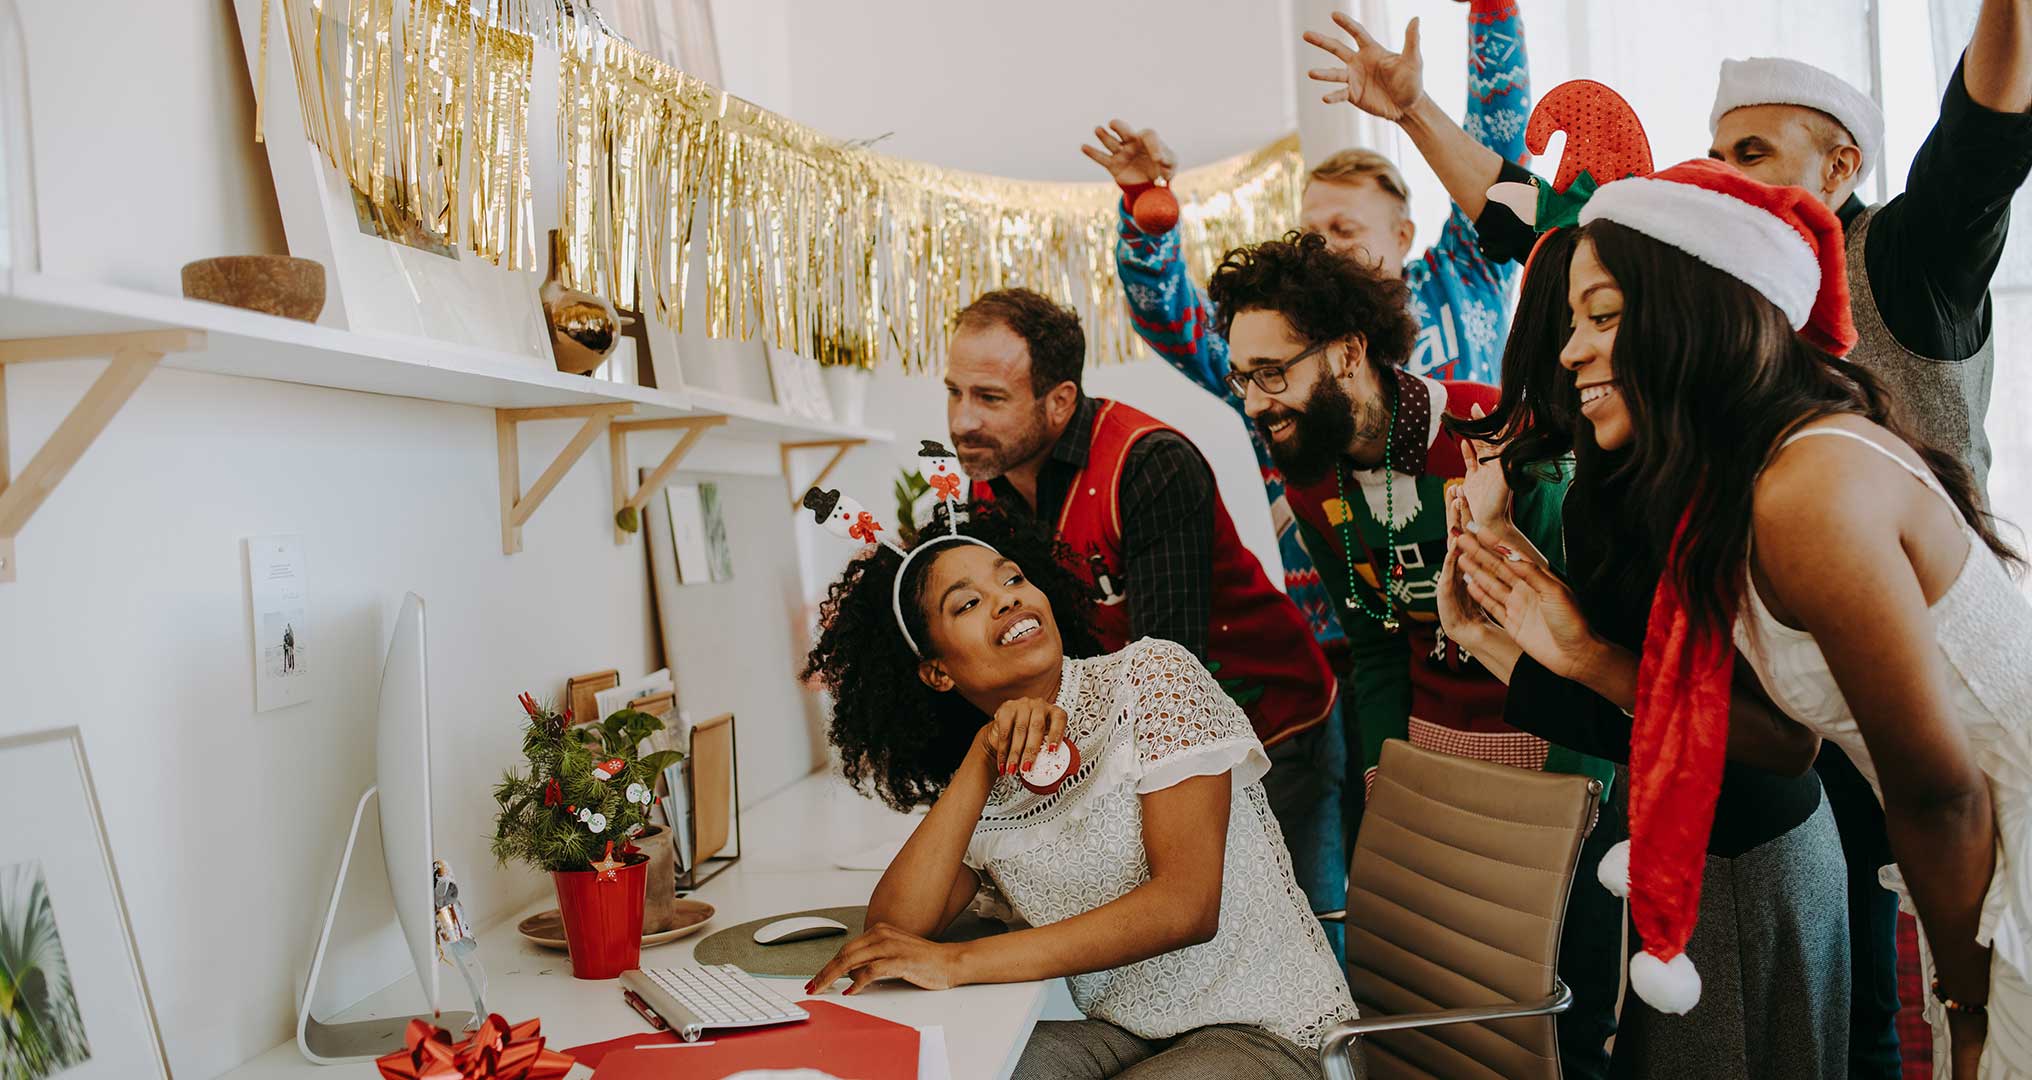 Boost Employee Morale During the Holidays